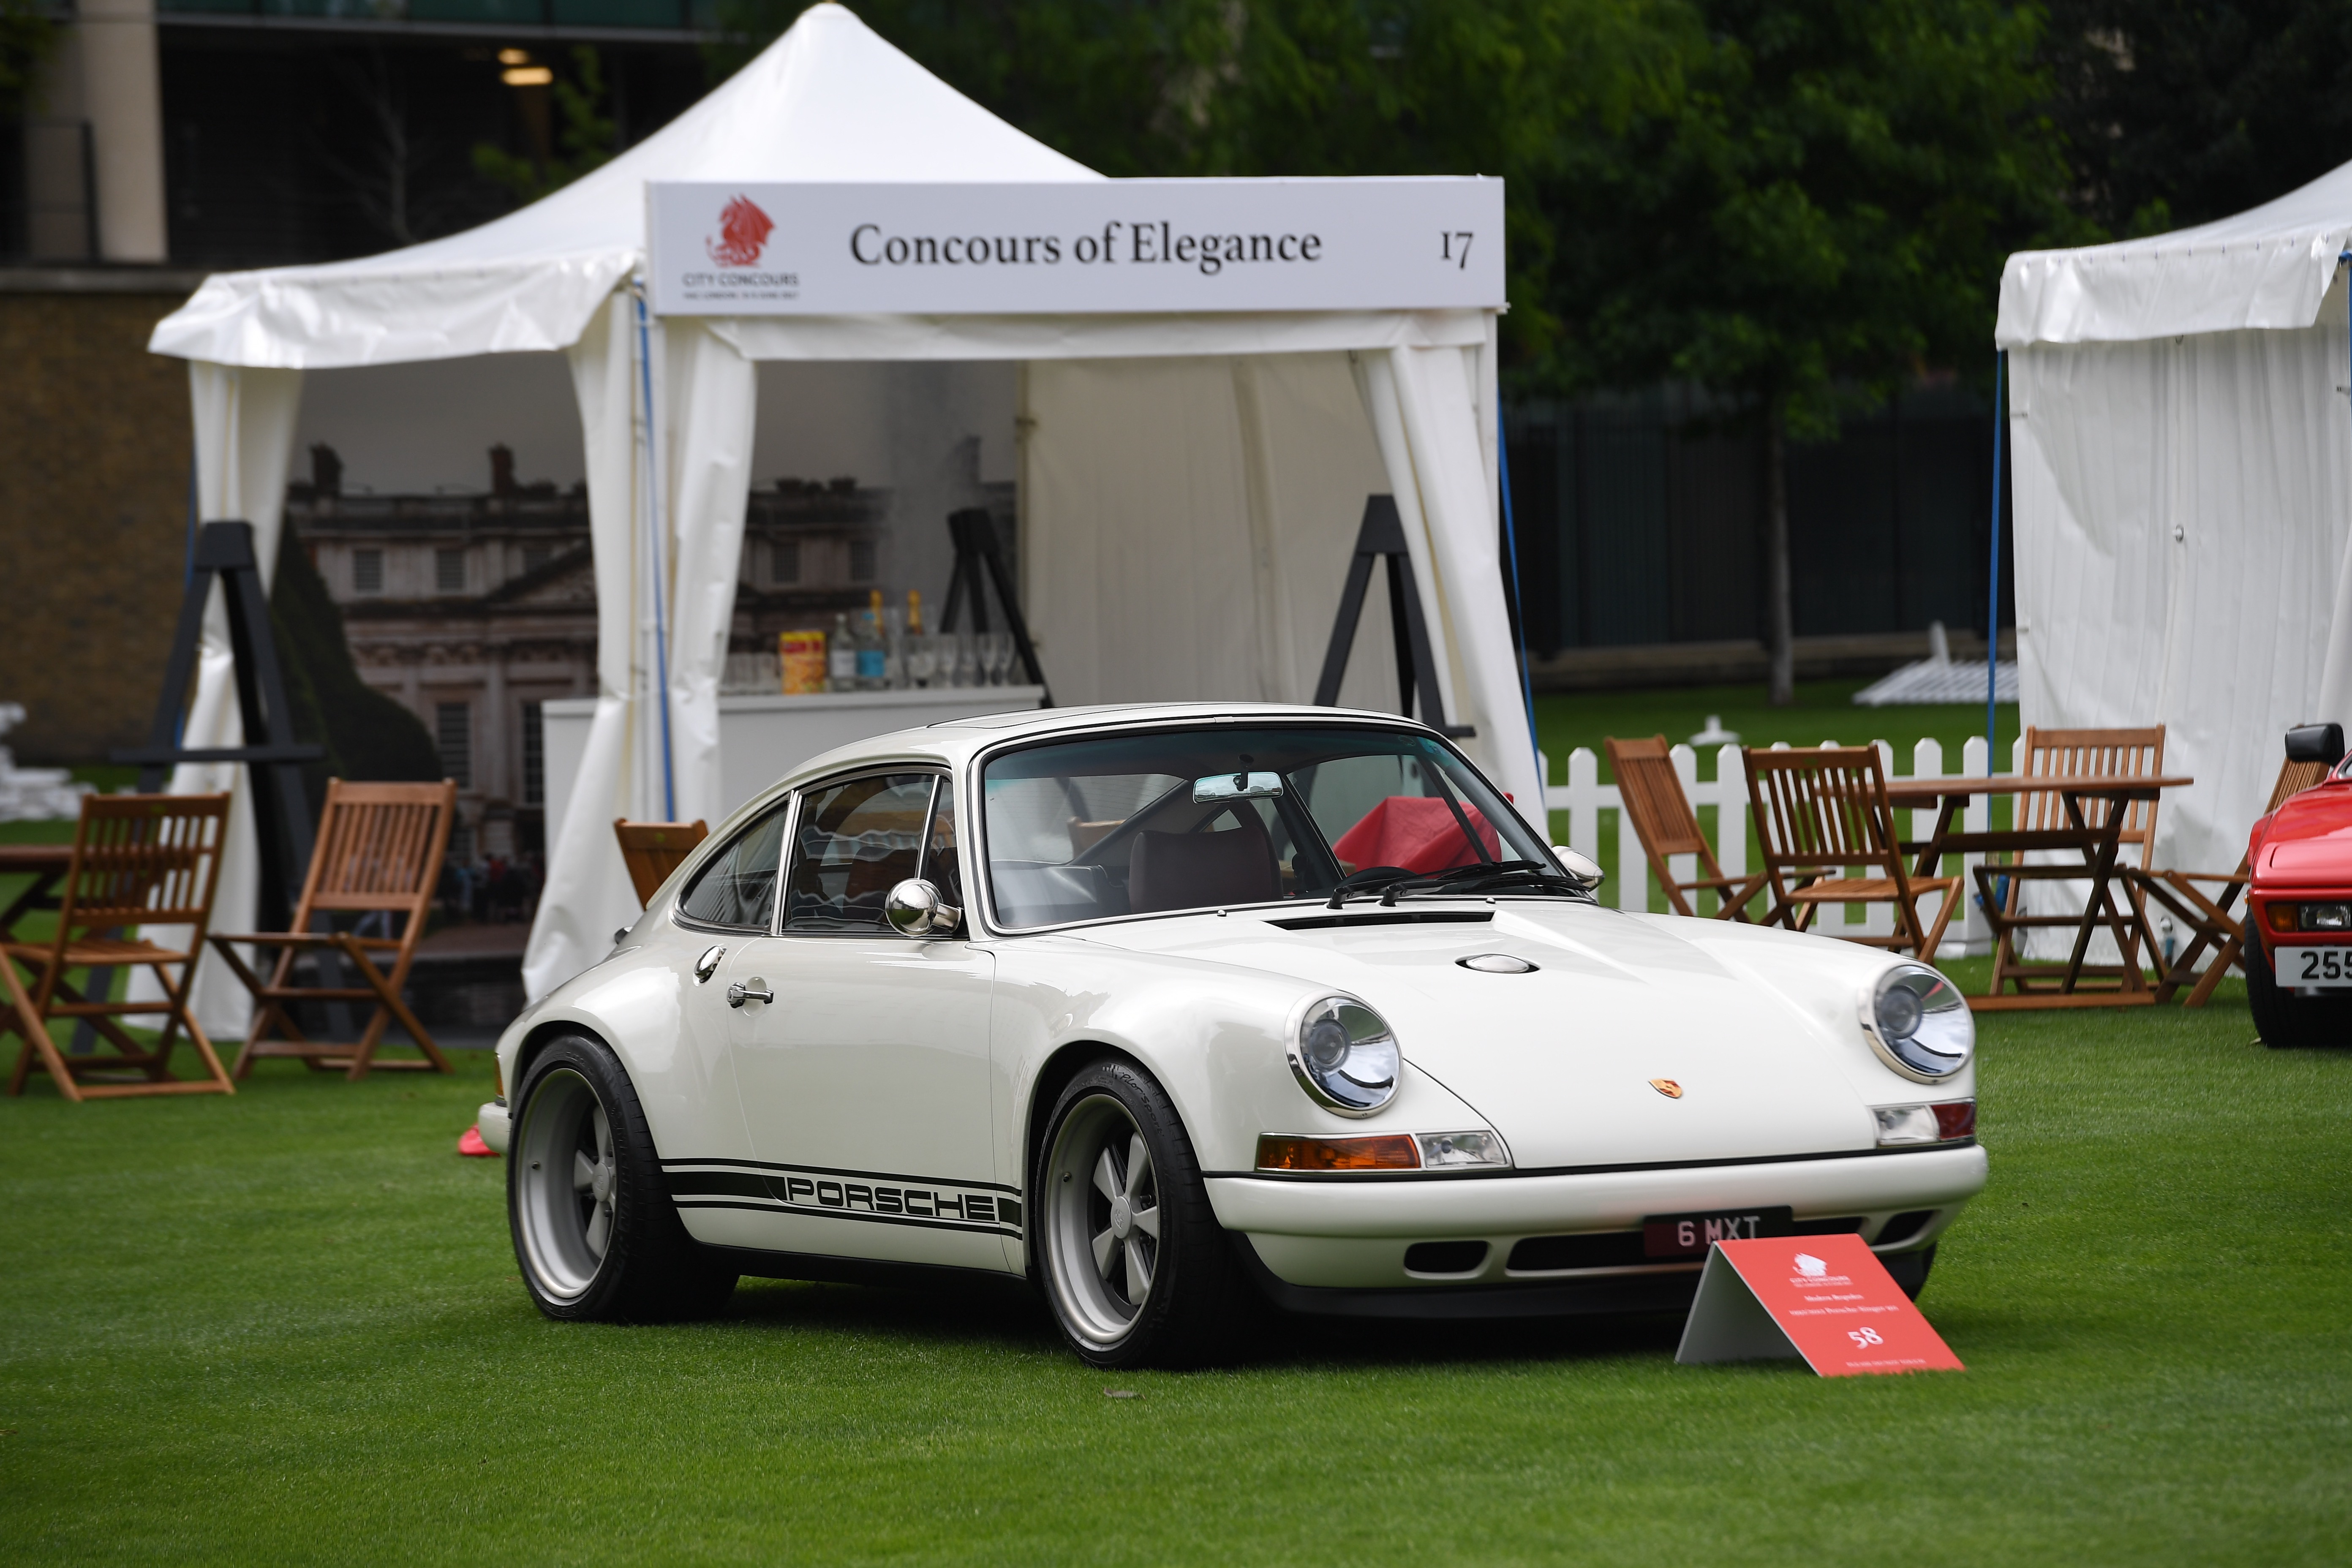 City Concours Welcomes More than a Thousand Visitors to Hugely Successful Opening Day